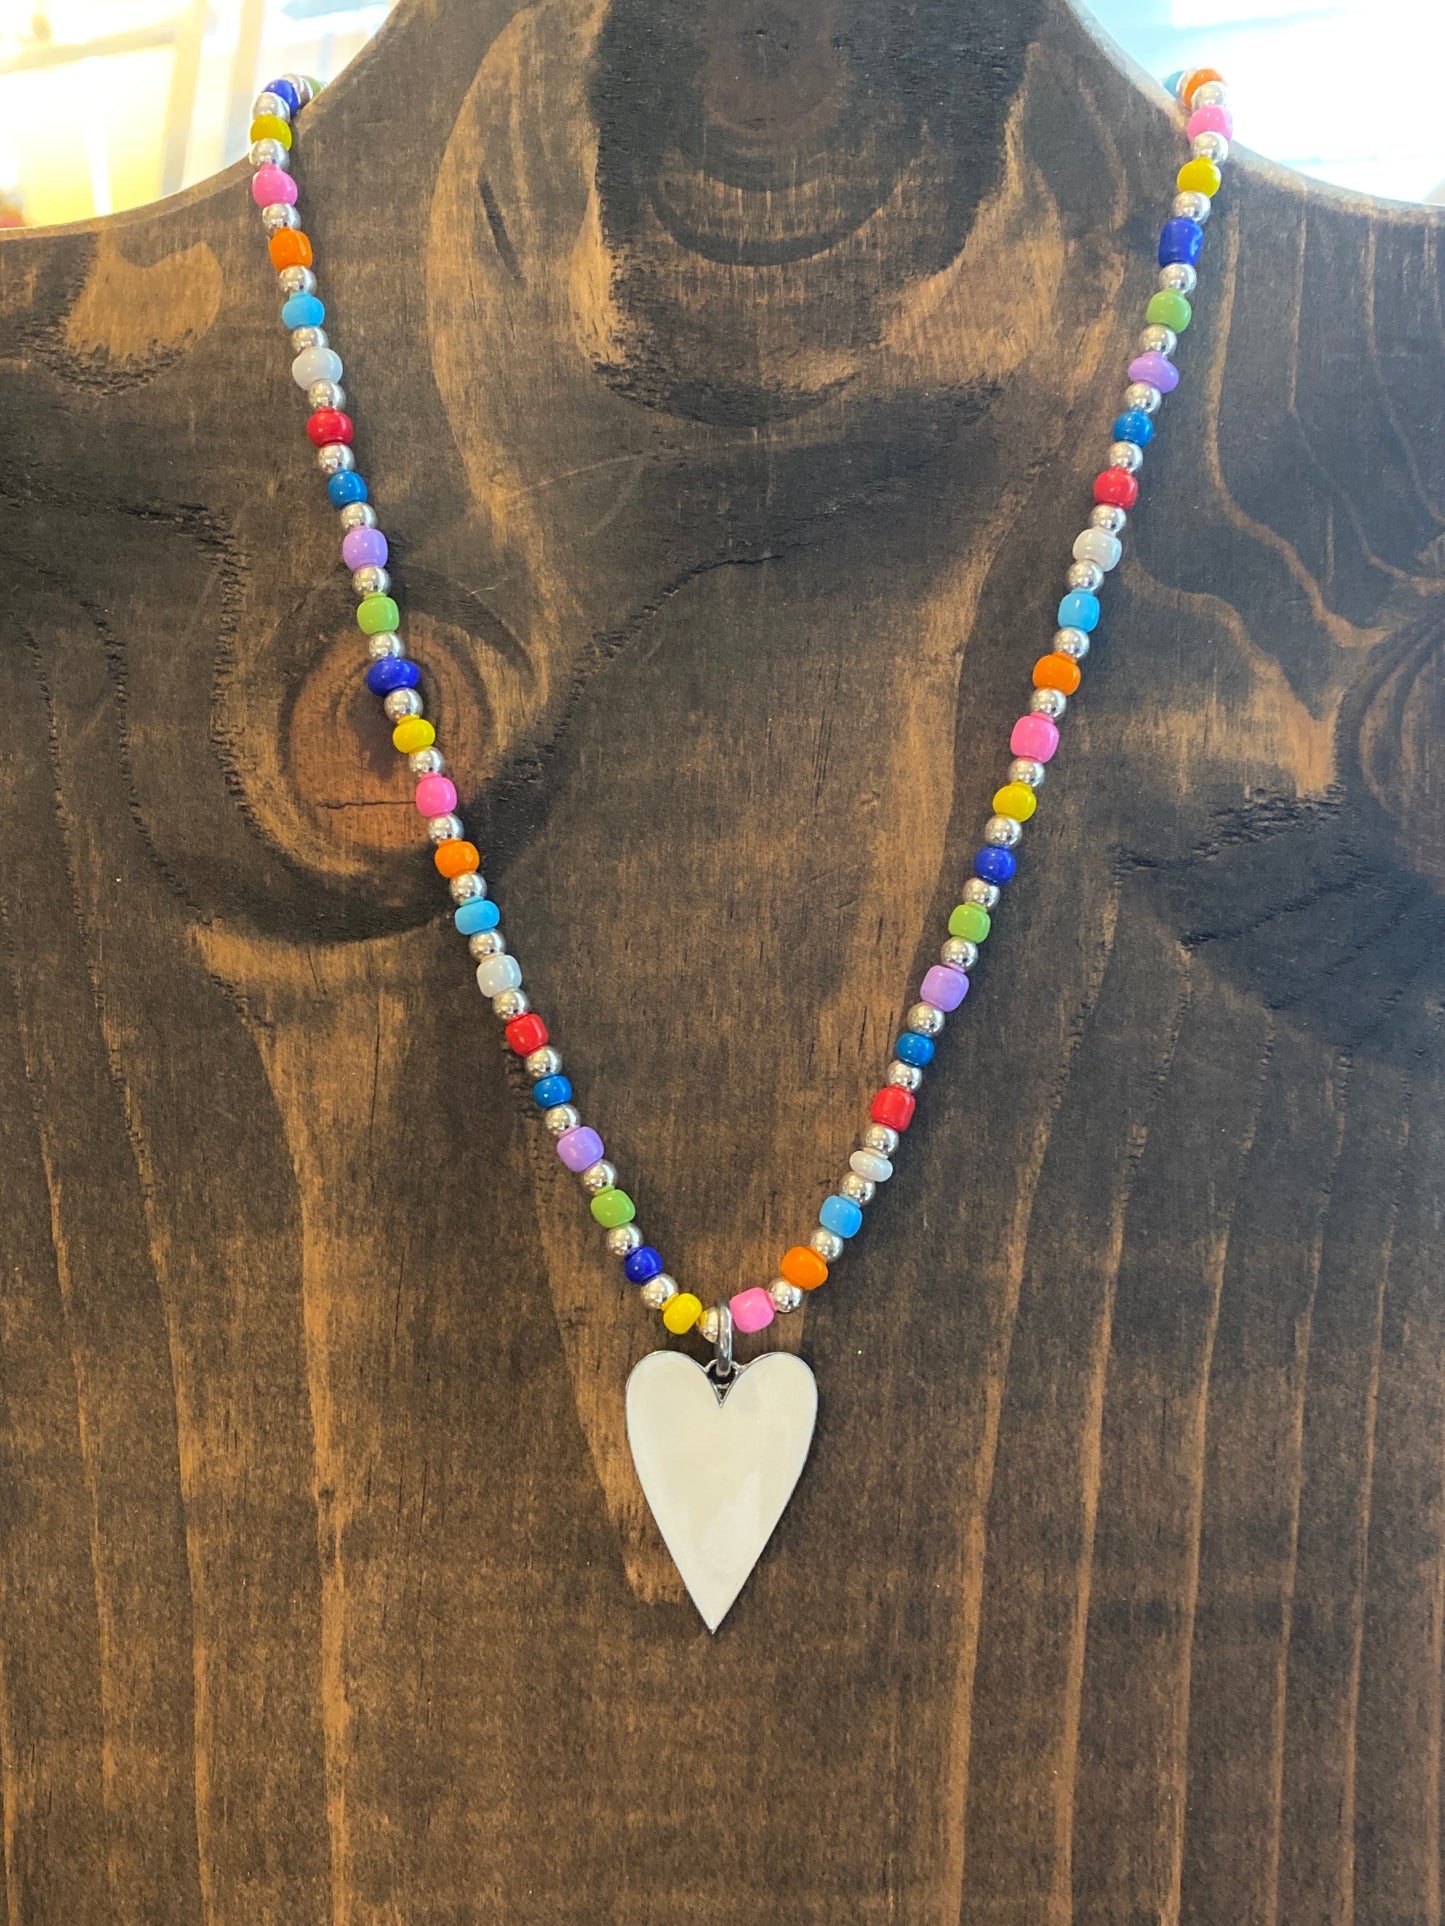 Rainbow Seed Beads With Sterling Silver Beads, With White Enamel Heart Pendant